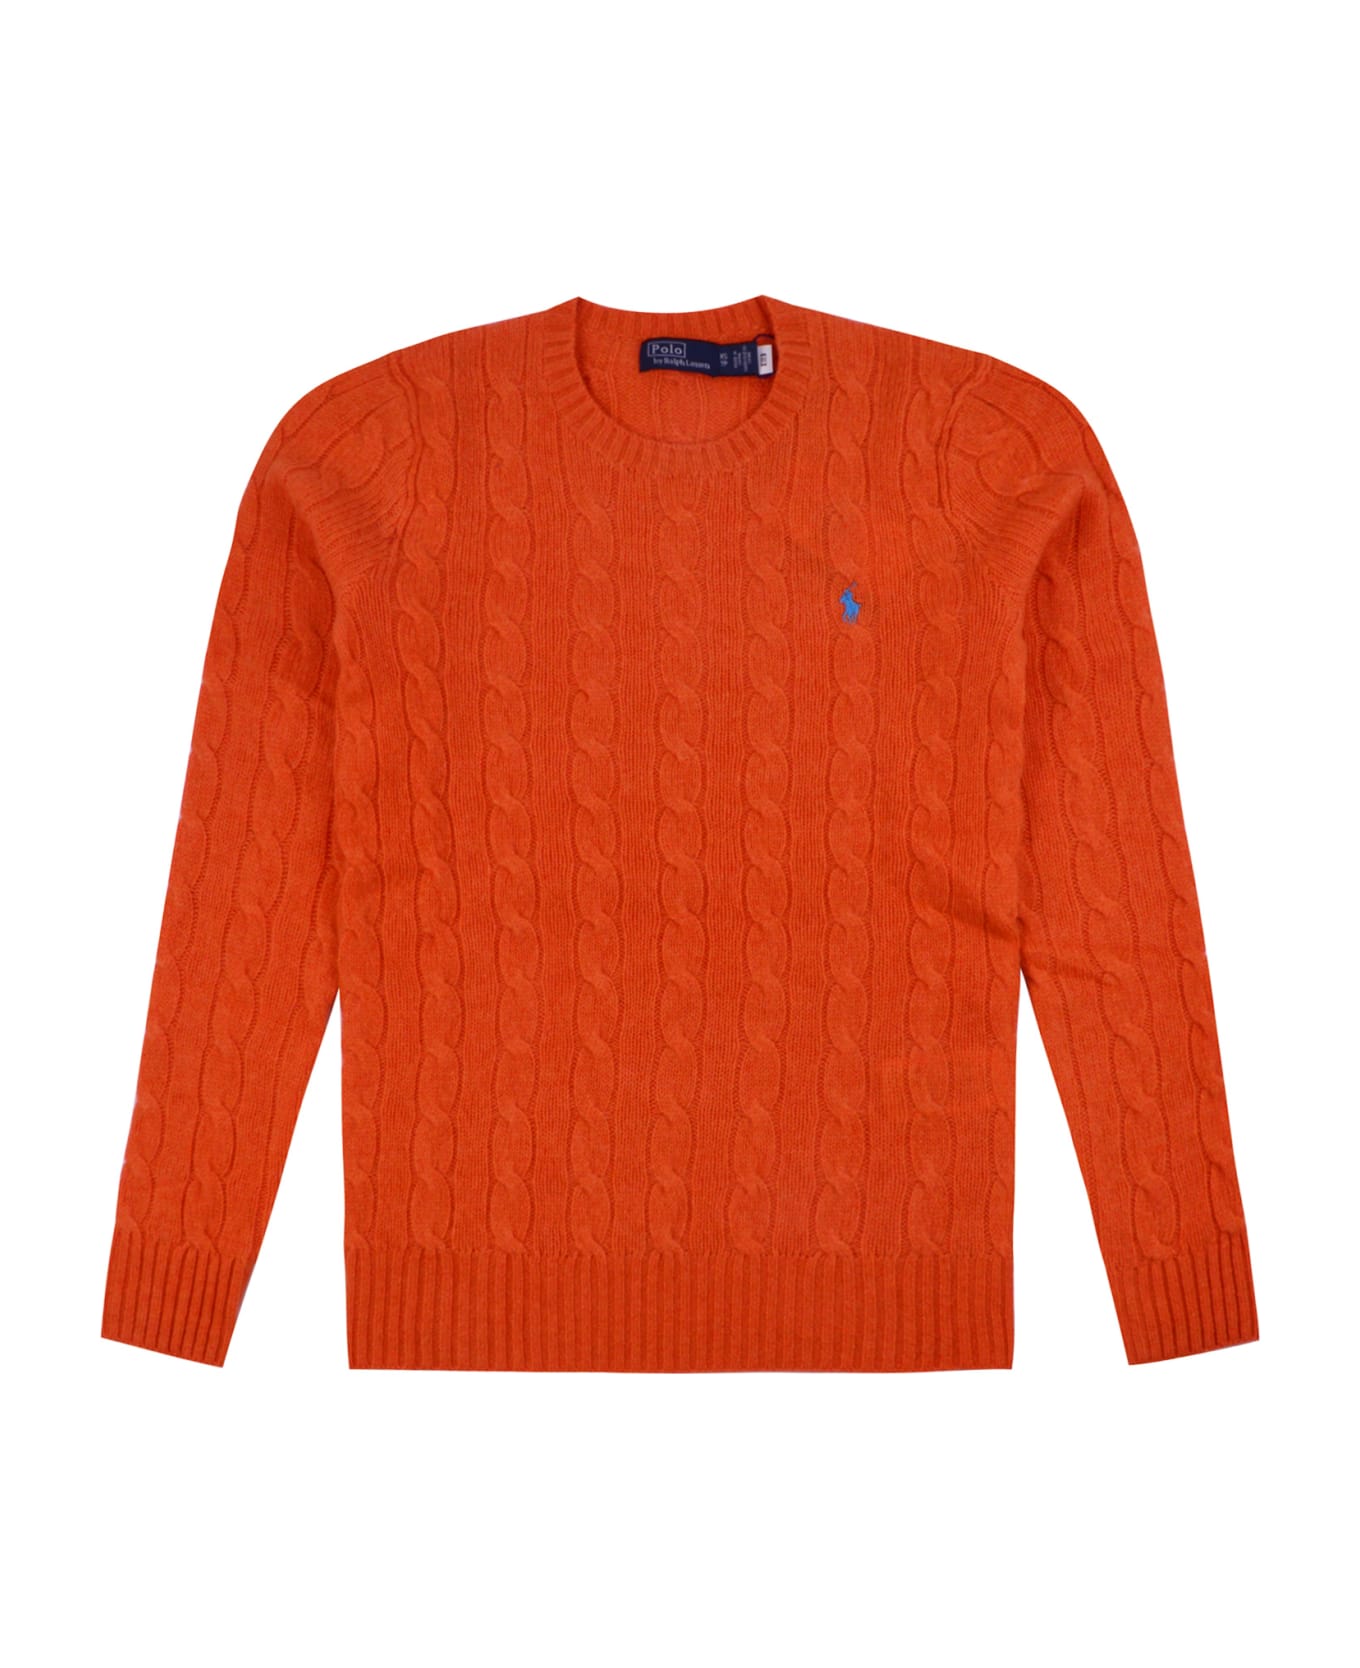 Polo Ralph Lauren Wool Blend Pullover With Embroidered Logo - Orange